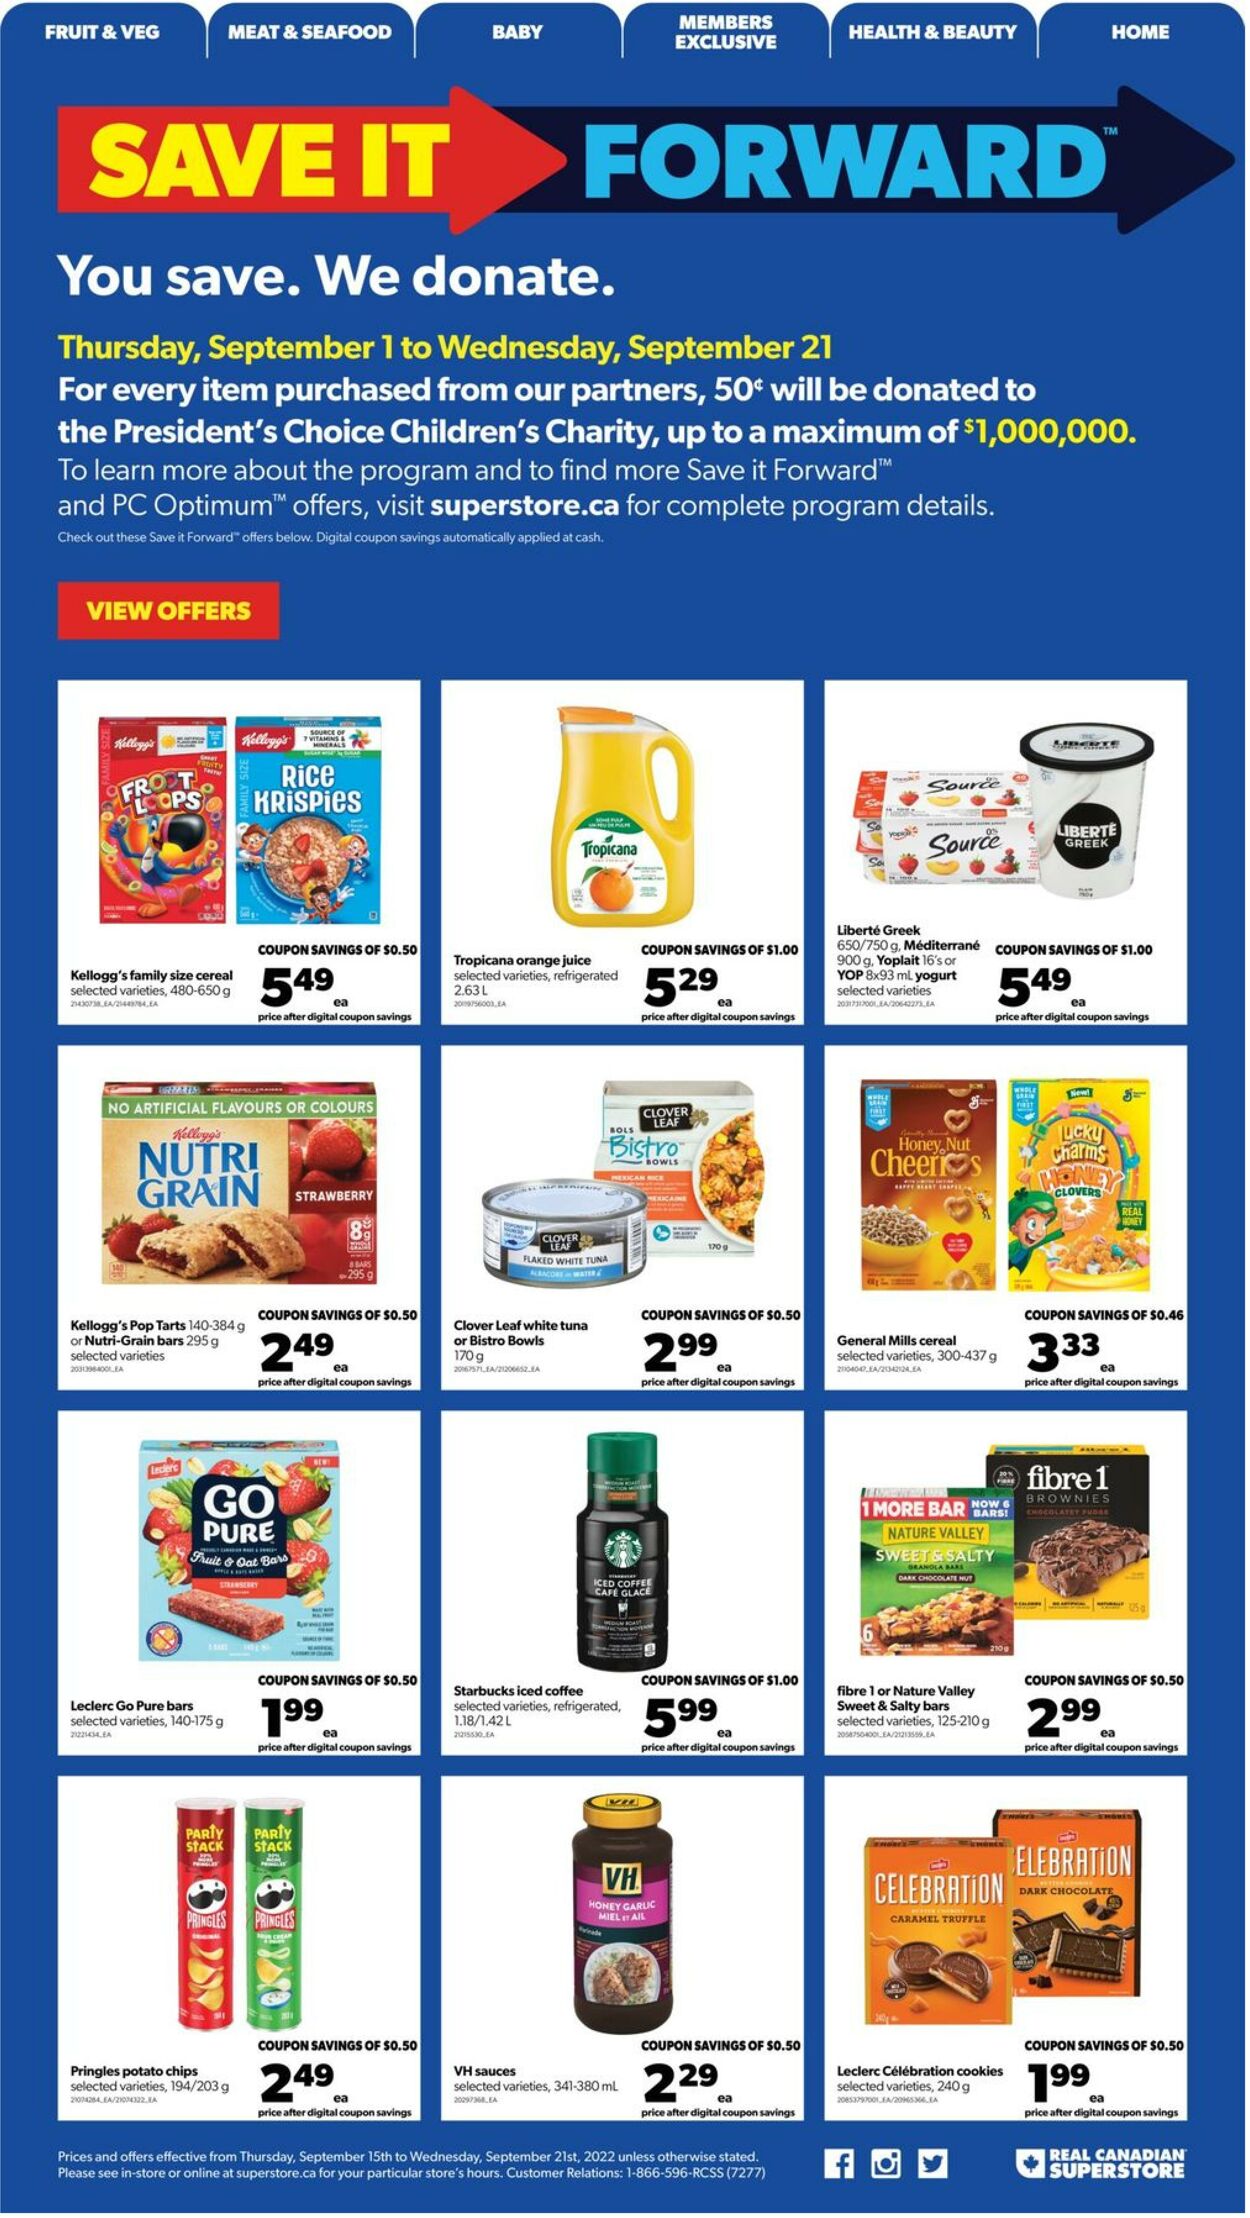 Flyer Real Canadian Superstore 15.09.2022 - 21.09.2022